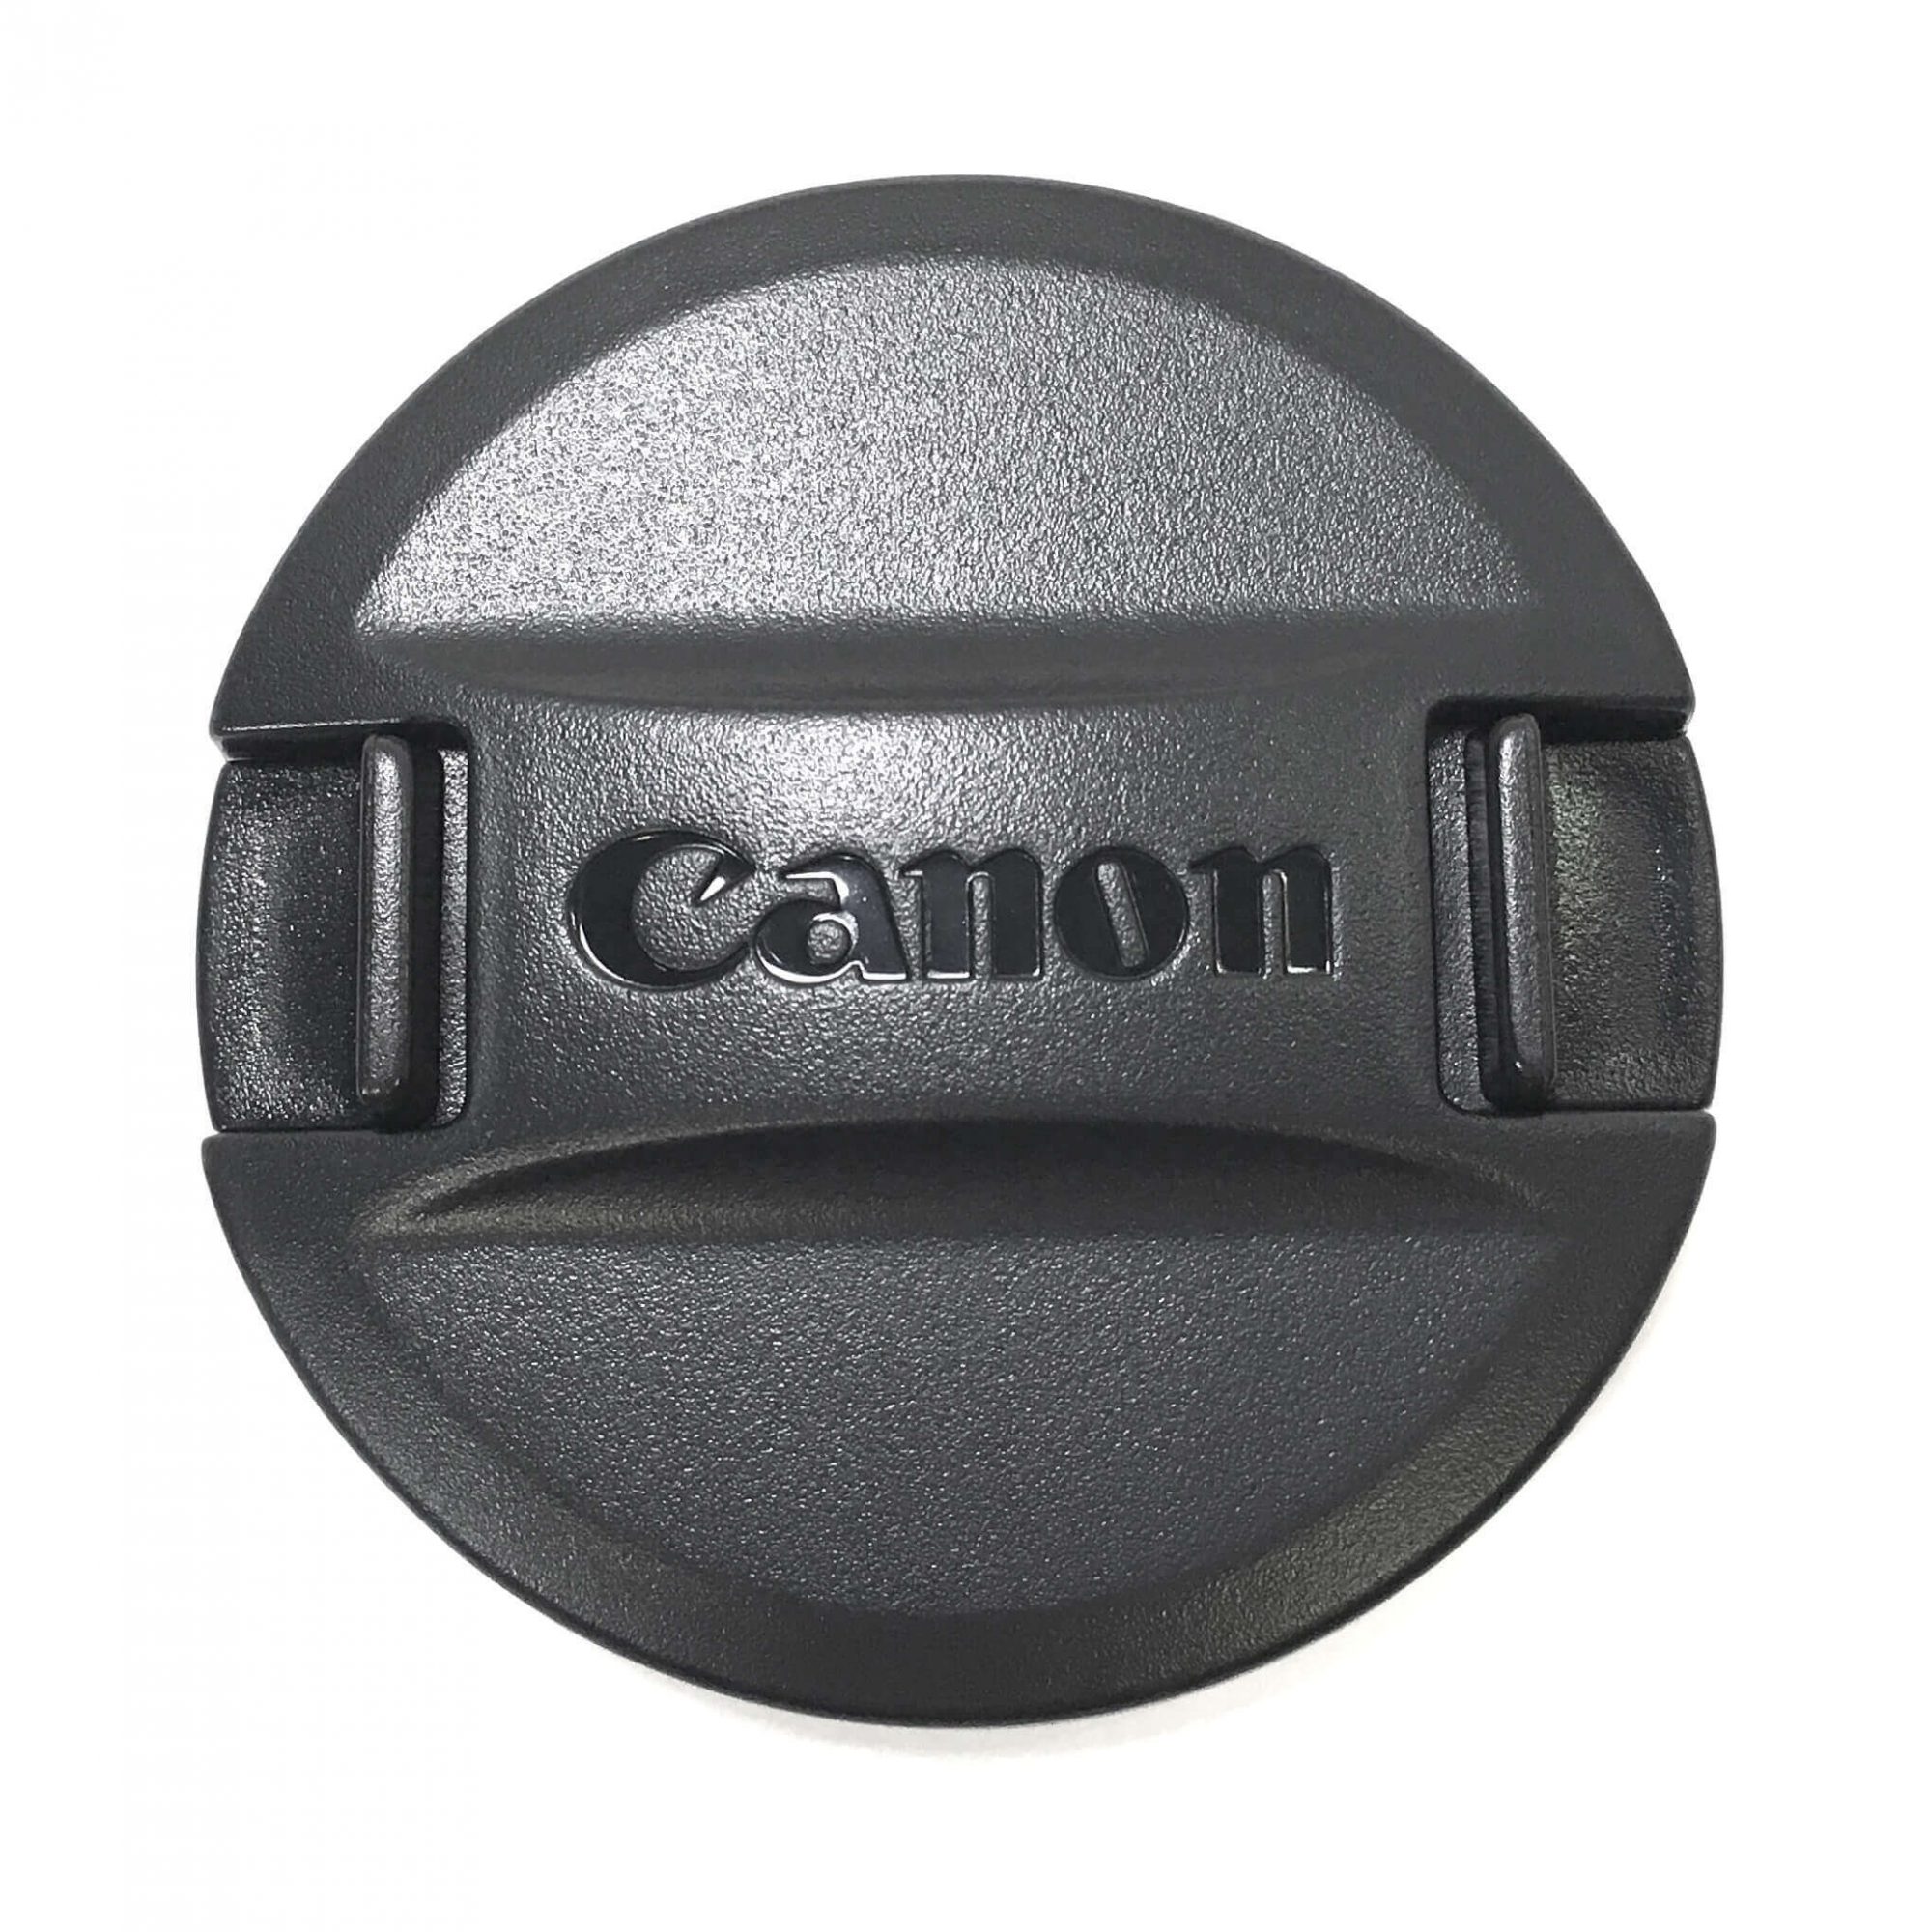 Original Lens Cap that fits on the the Canon XA30 camcorder. It is a genuine Canon part, sourced directly from Canon USA. Brand new factory fresh. Free Shipping.